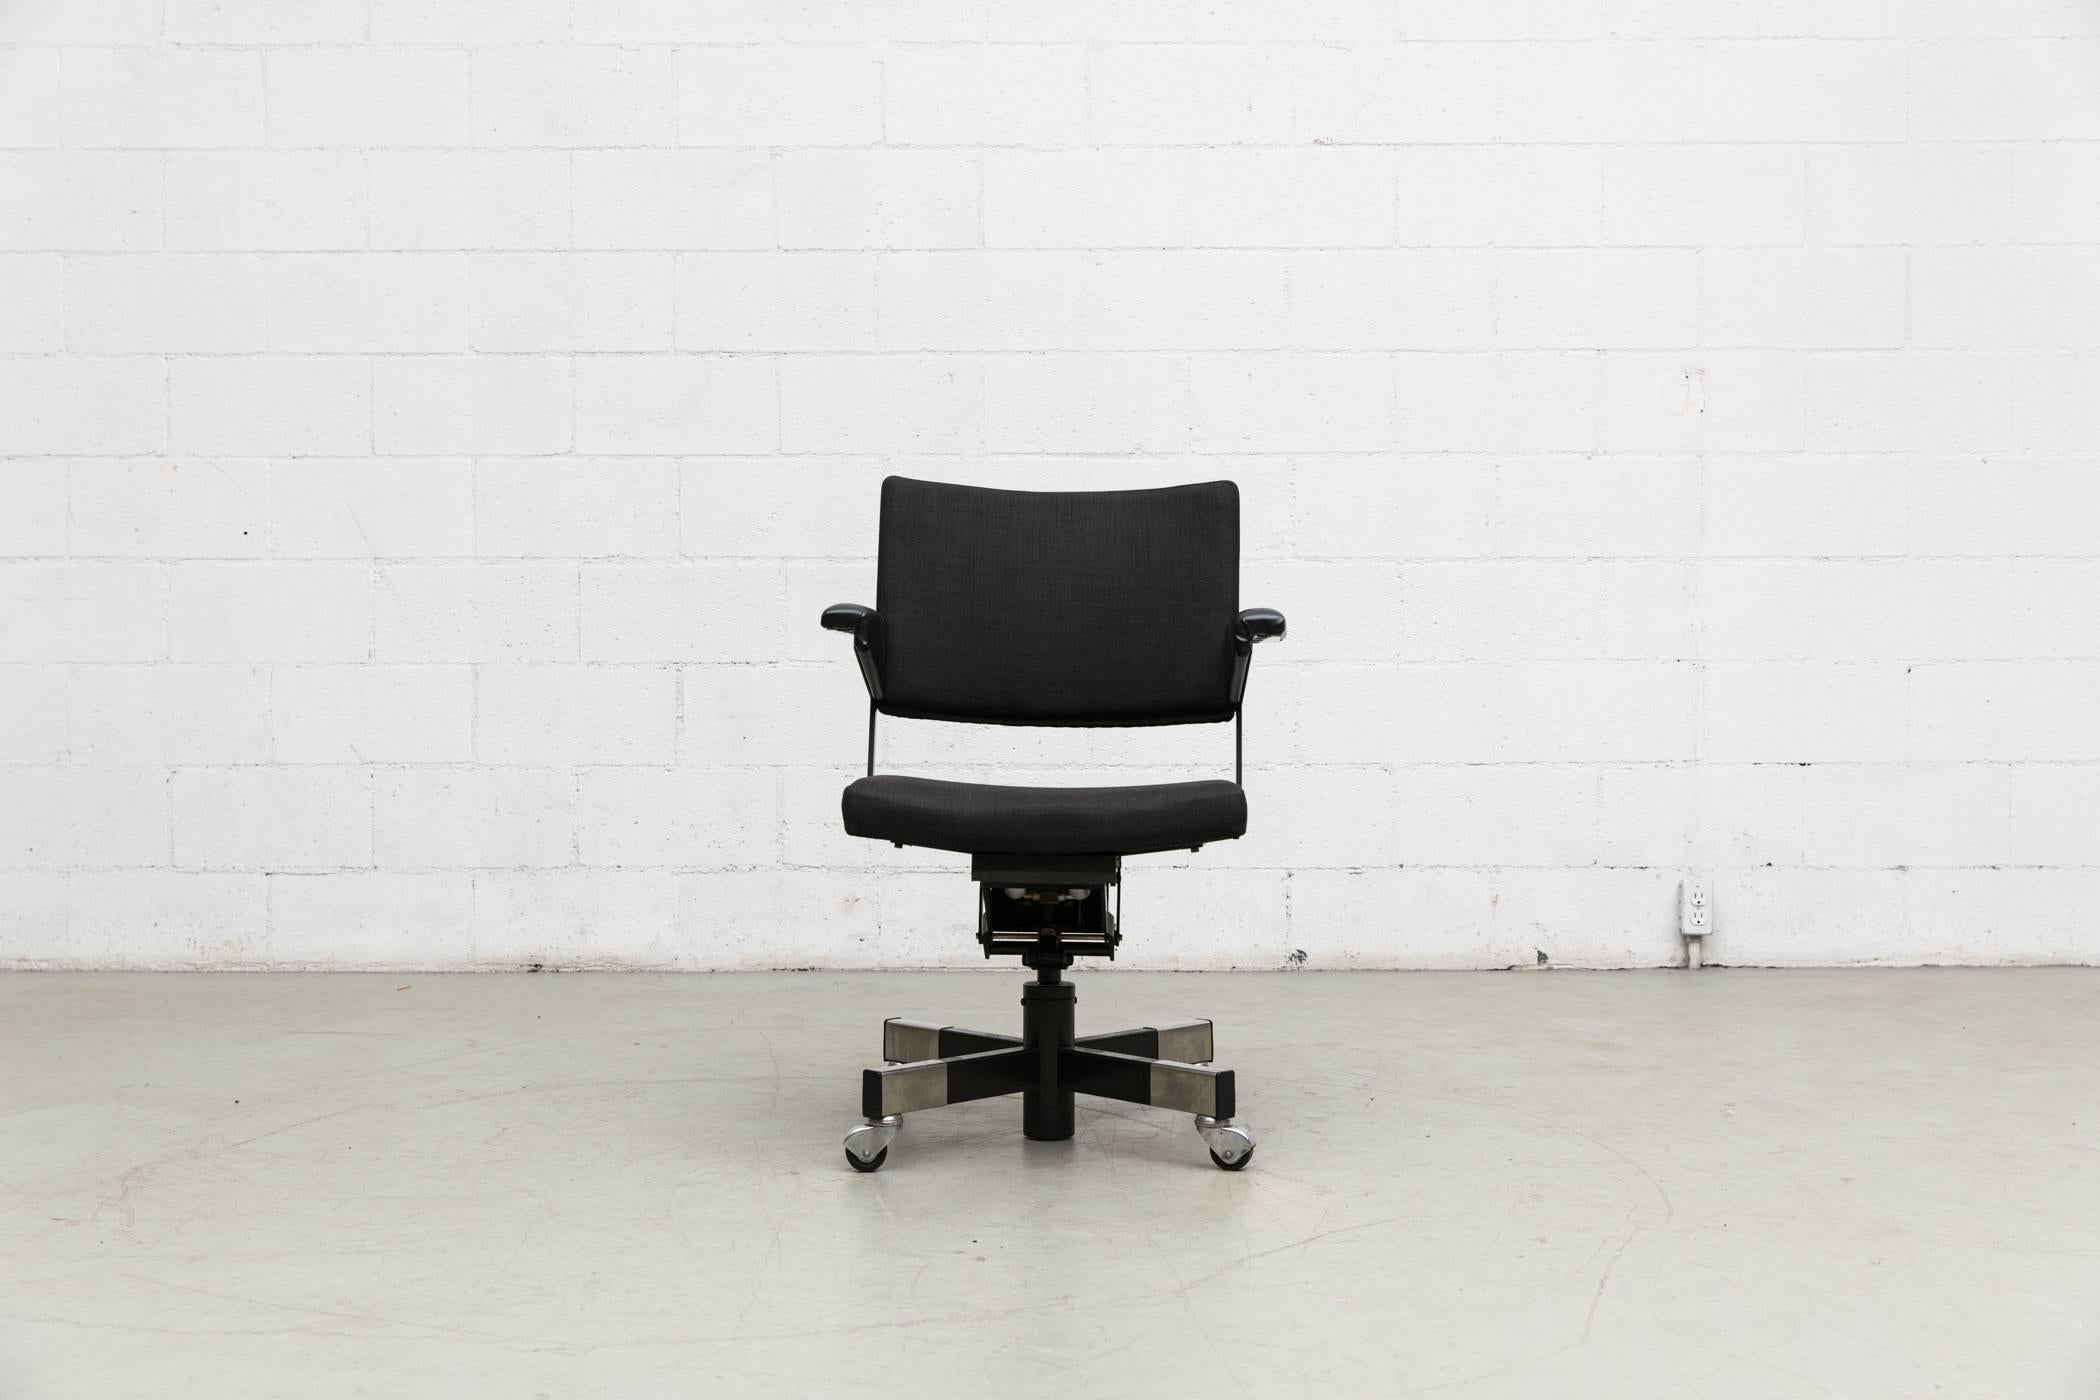 Newly upholstered Industrial rolling office chair in almost black fabric with black enameled metal frame by A. R. Cordemeyer for Gispen with adjustable seat height. Handsome office chair. Others available, Listed separately.